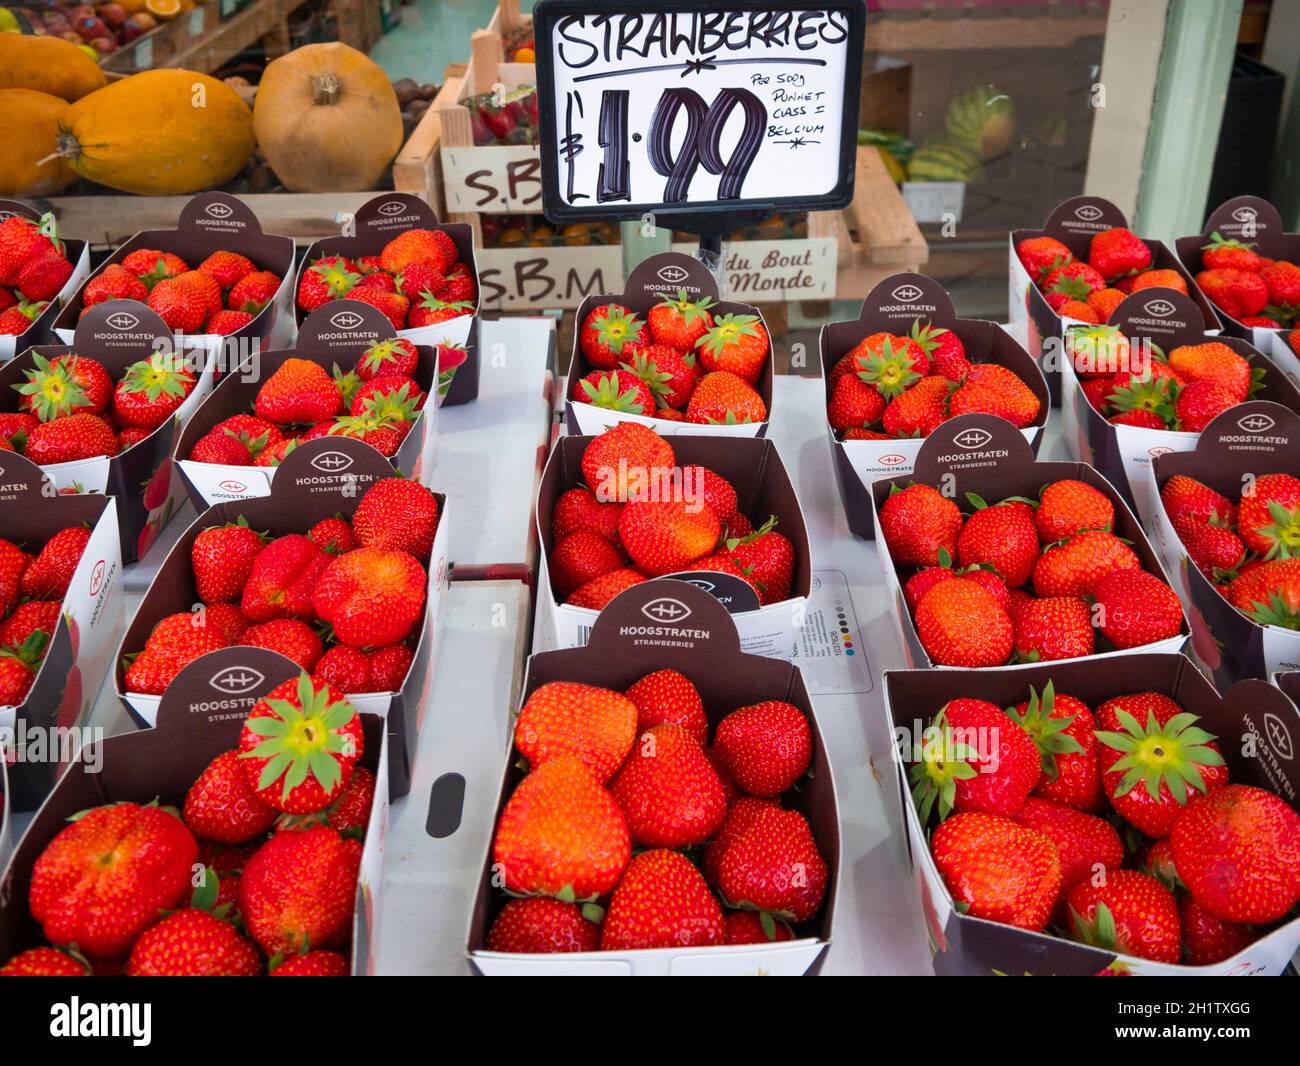 Ripe Belgian grown class 1 Strawberries for sale at £1.99 per 500g in Stokesley  North Yorkshire England Stock Photo